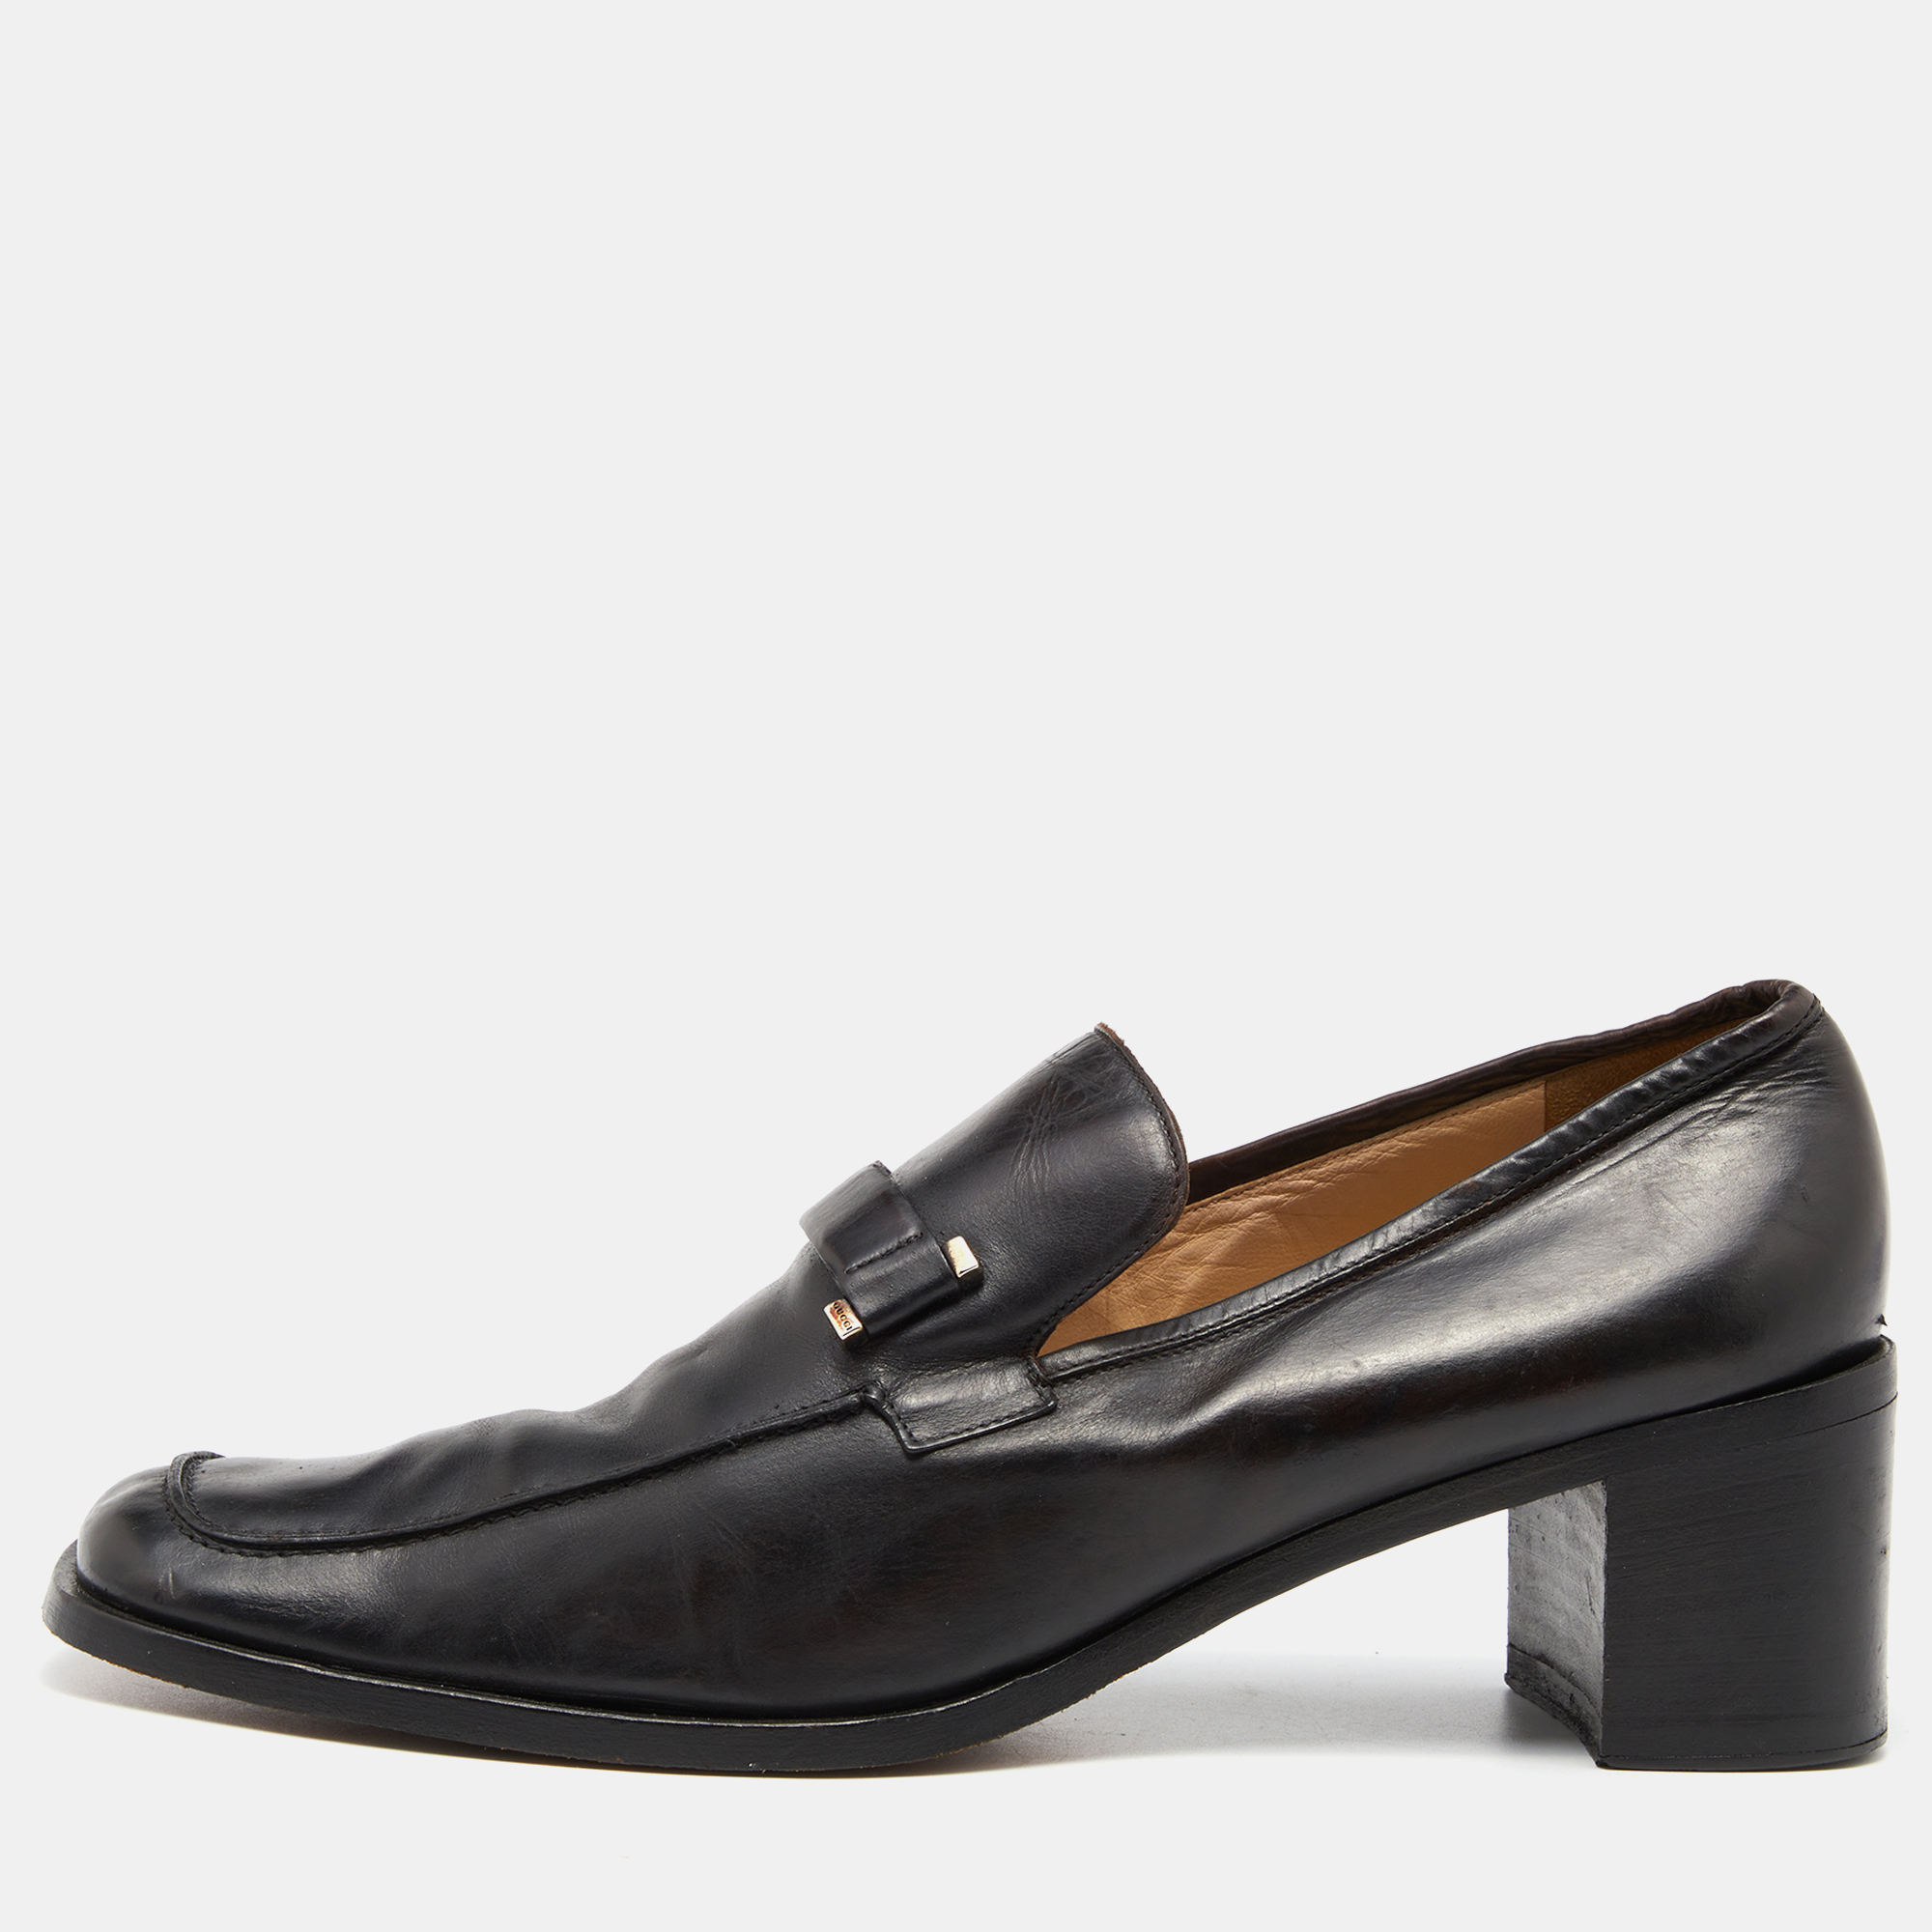 Pre-owned Gucci Black Leather Block Heel Loafer Pumps Size 40